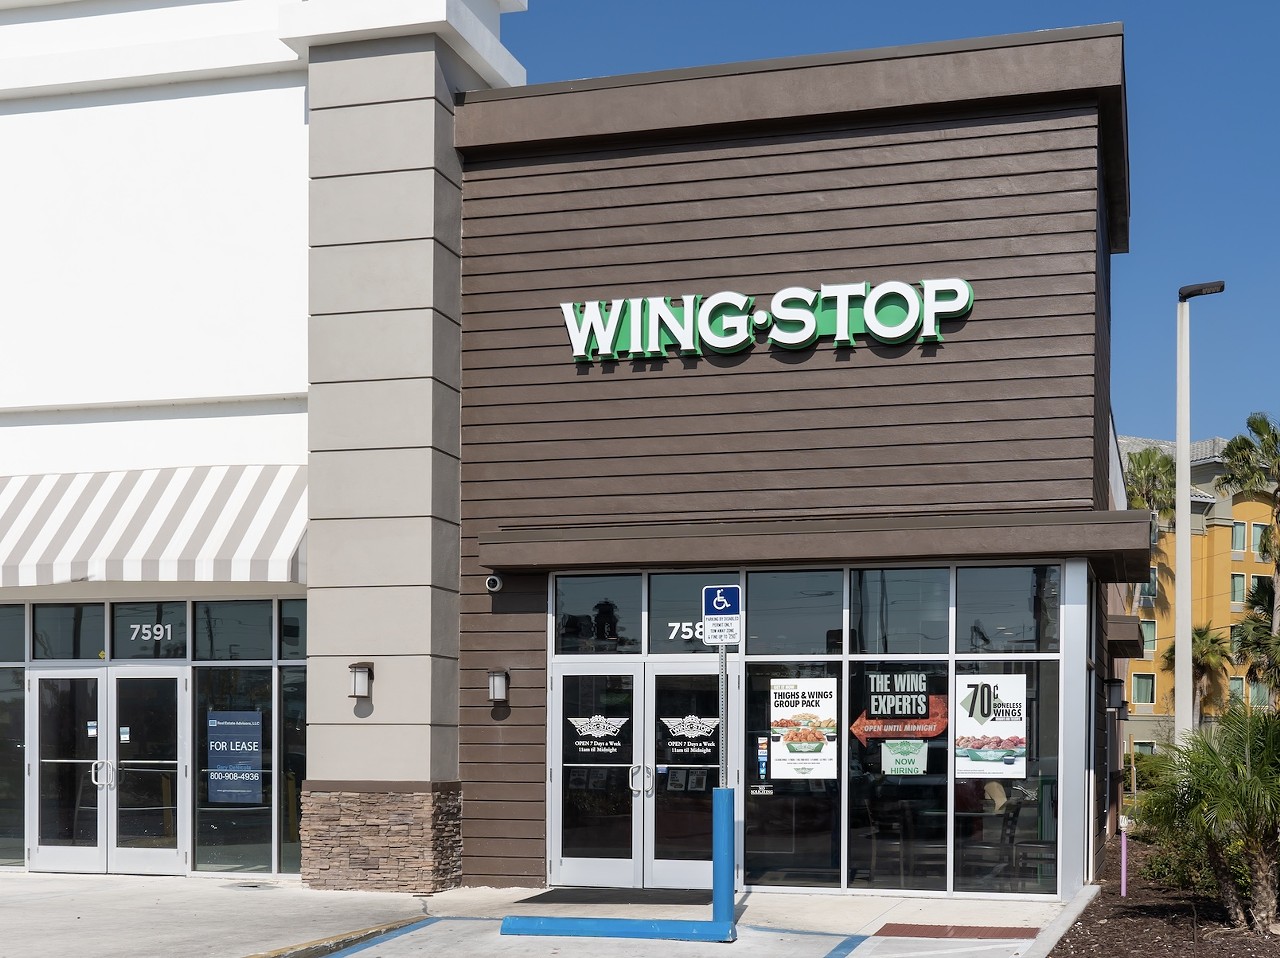 Wingstop
Multiple Locations, wingstop.com
This Dallas-based wing chain boasts over 1,500 locations, serving up a variety of flavors in a casual setting. With a plethora of San Antonio locations to choose from, it makes a convenient stop for hungry customers.